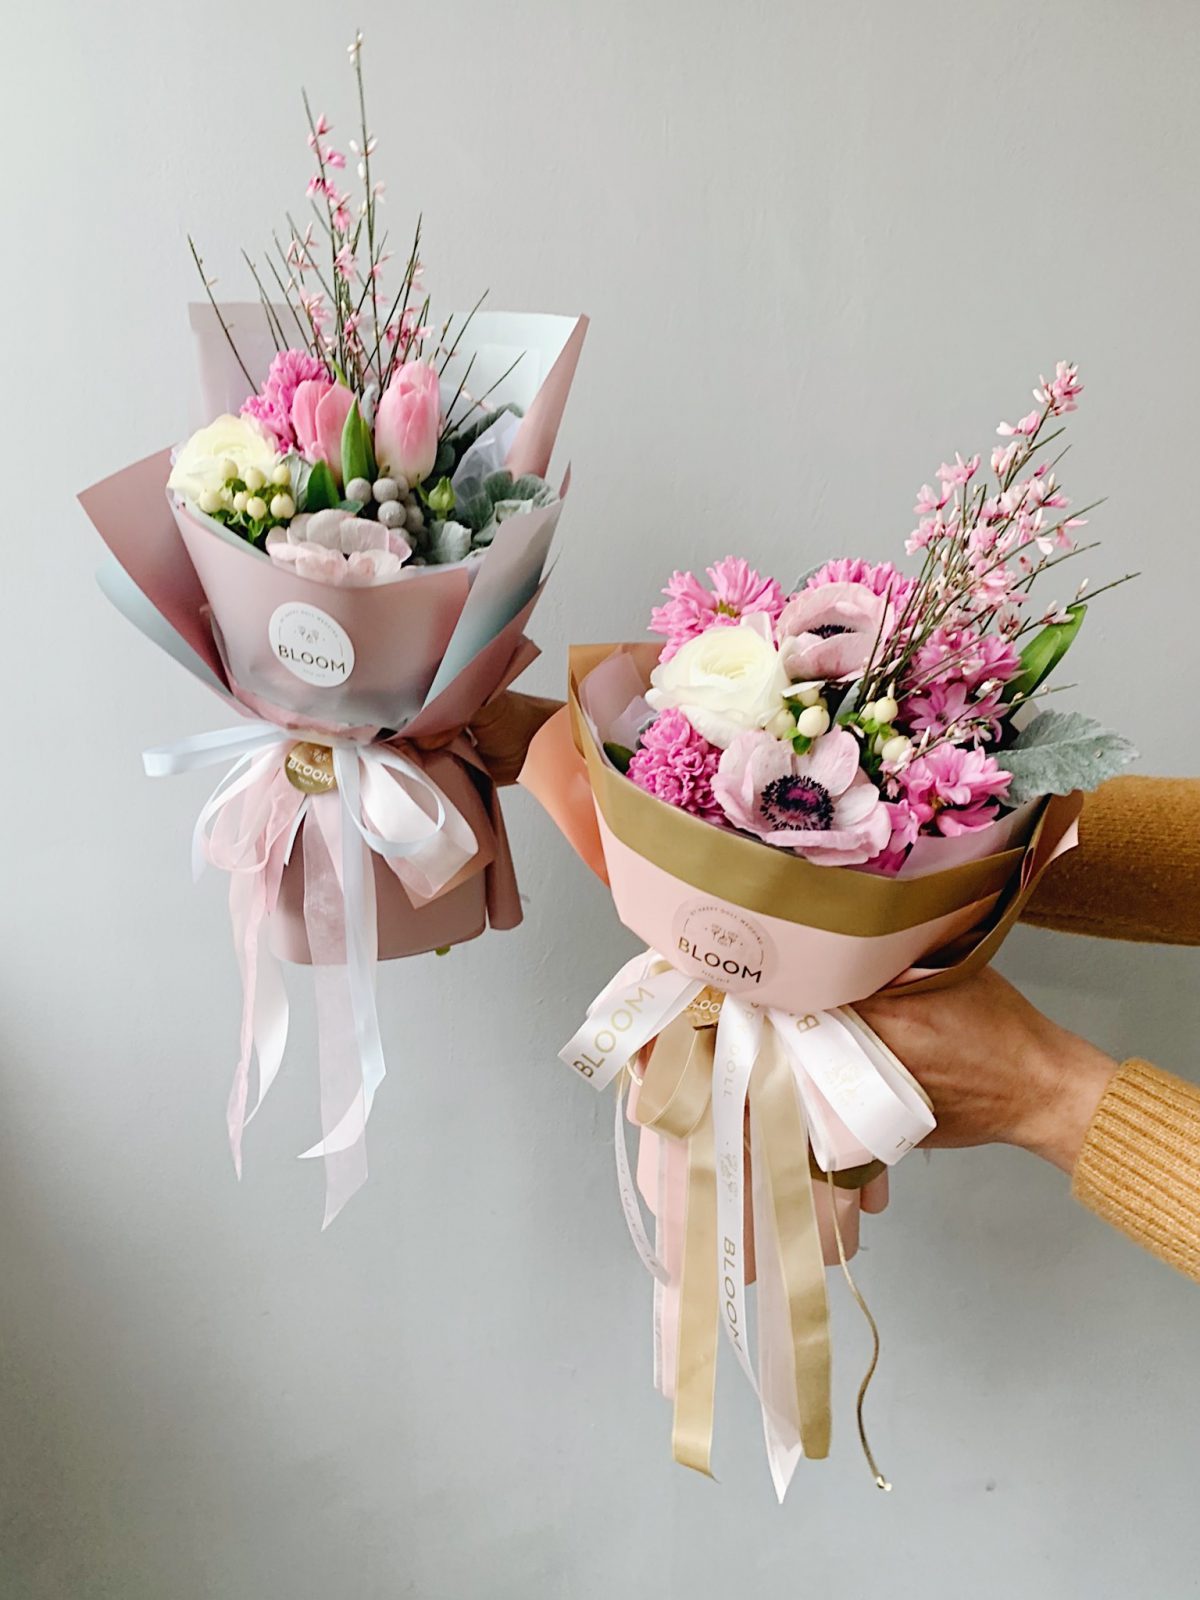 This is a delicate and delightful combination of colors, carefully selected to convey harmony and positive emotions. This bouquet is the perfect way to express appreciation, love or friendship. Each flower in the “Compliment Bouquet” is a wonderful element that creates an atmosphere of joy and warmth.